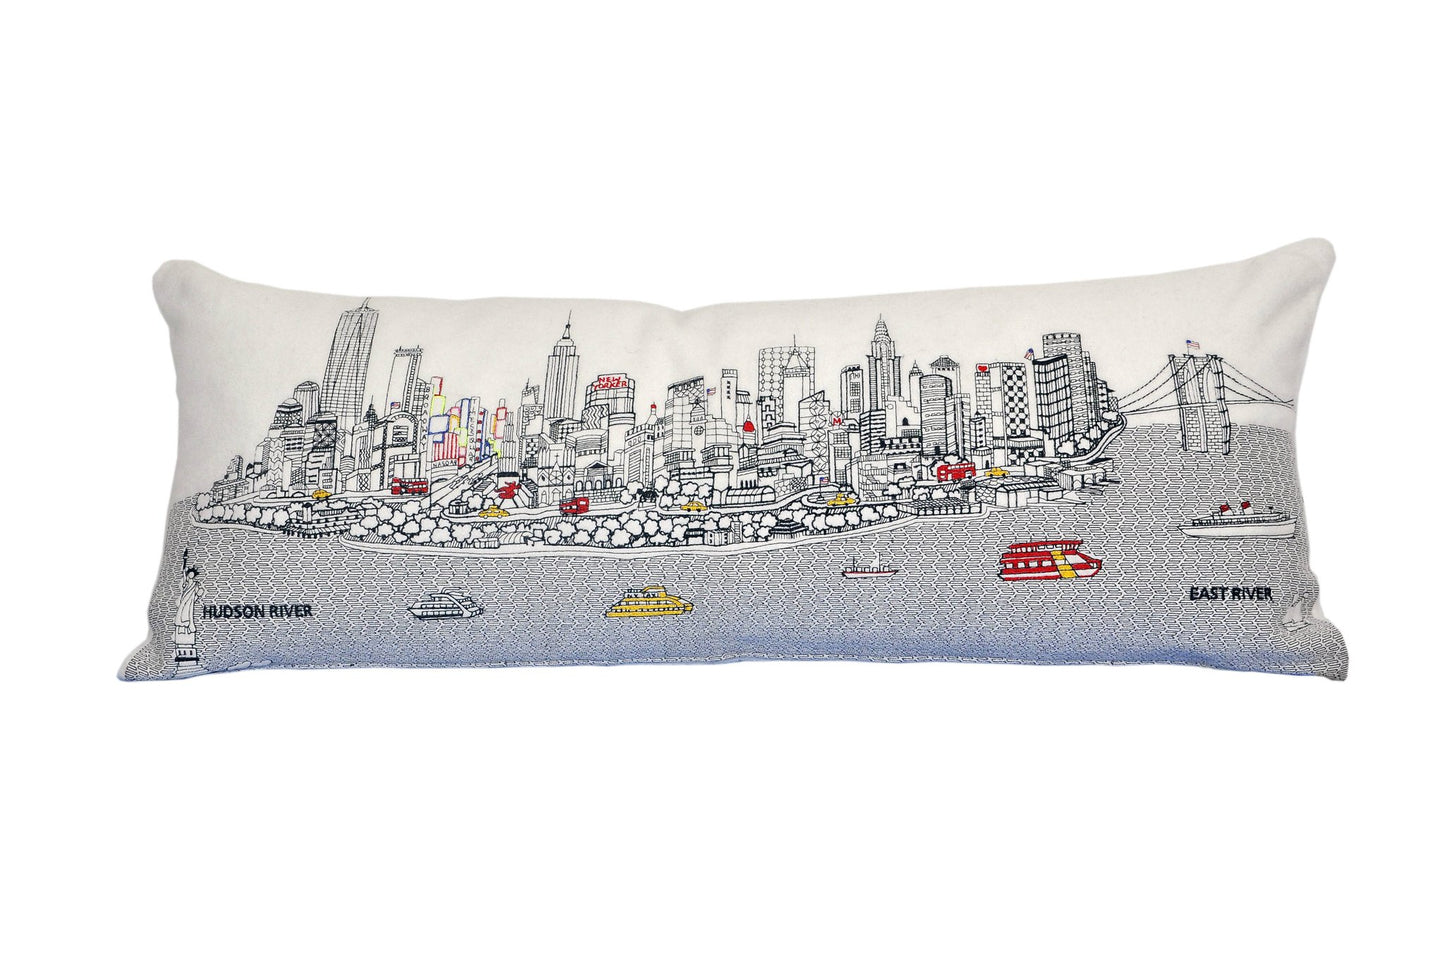 NYC Skyline Pillow Queen Day-37"